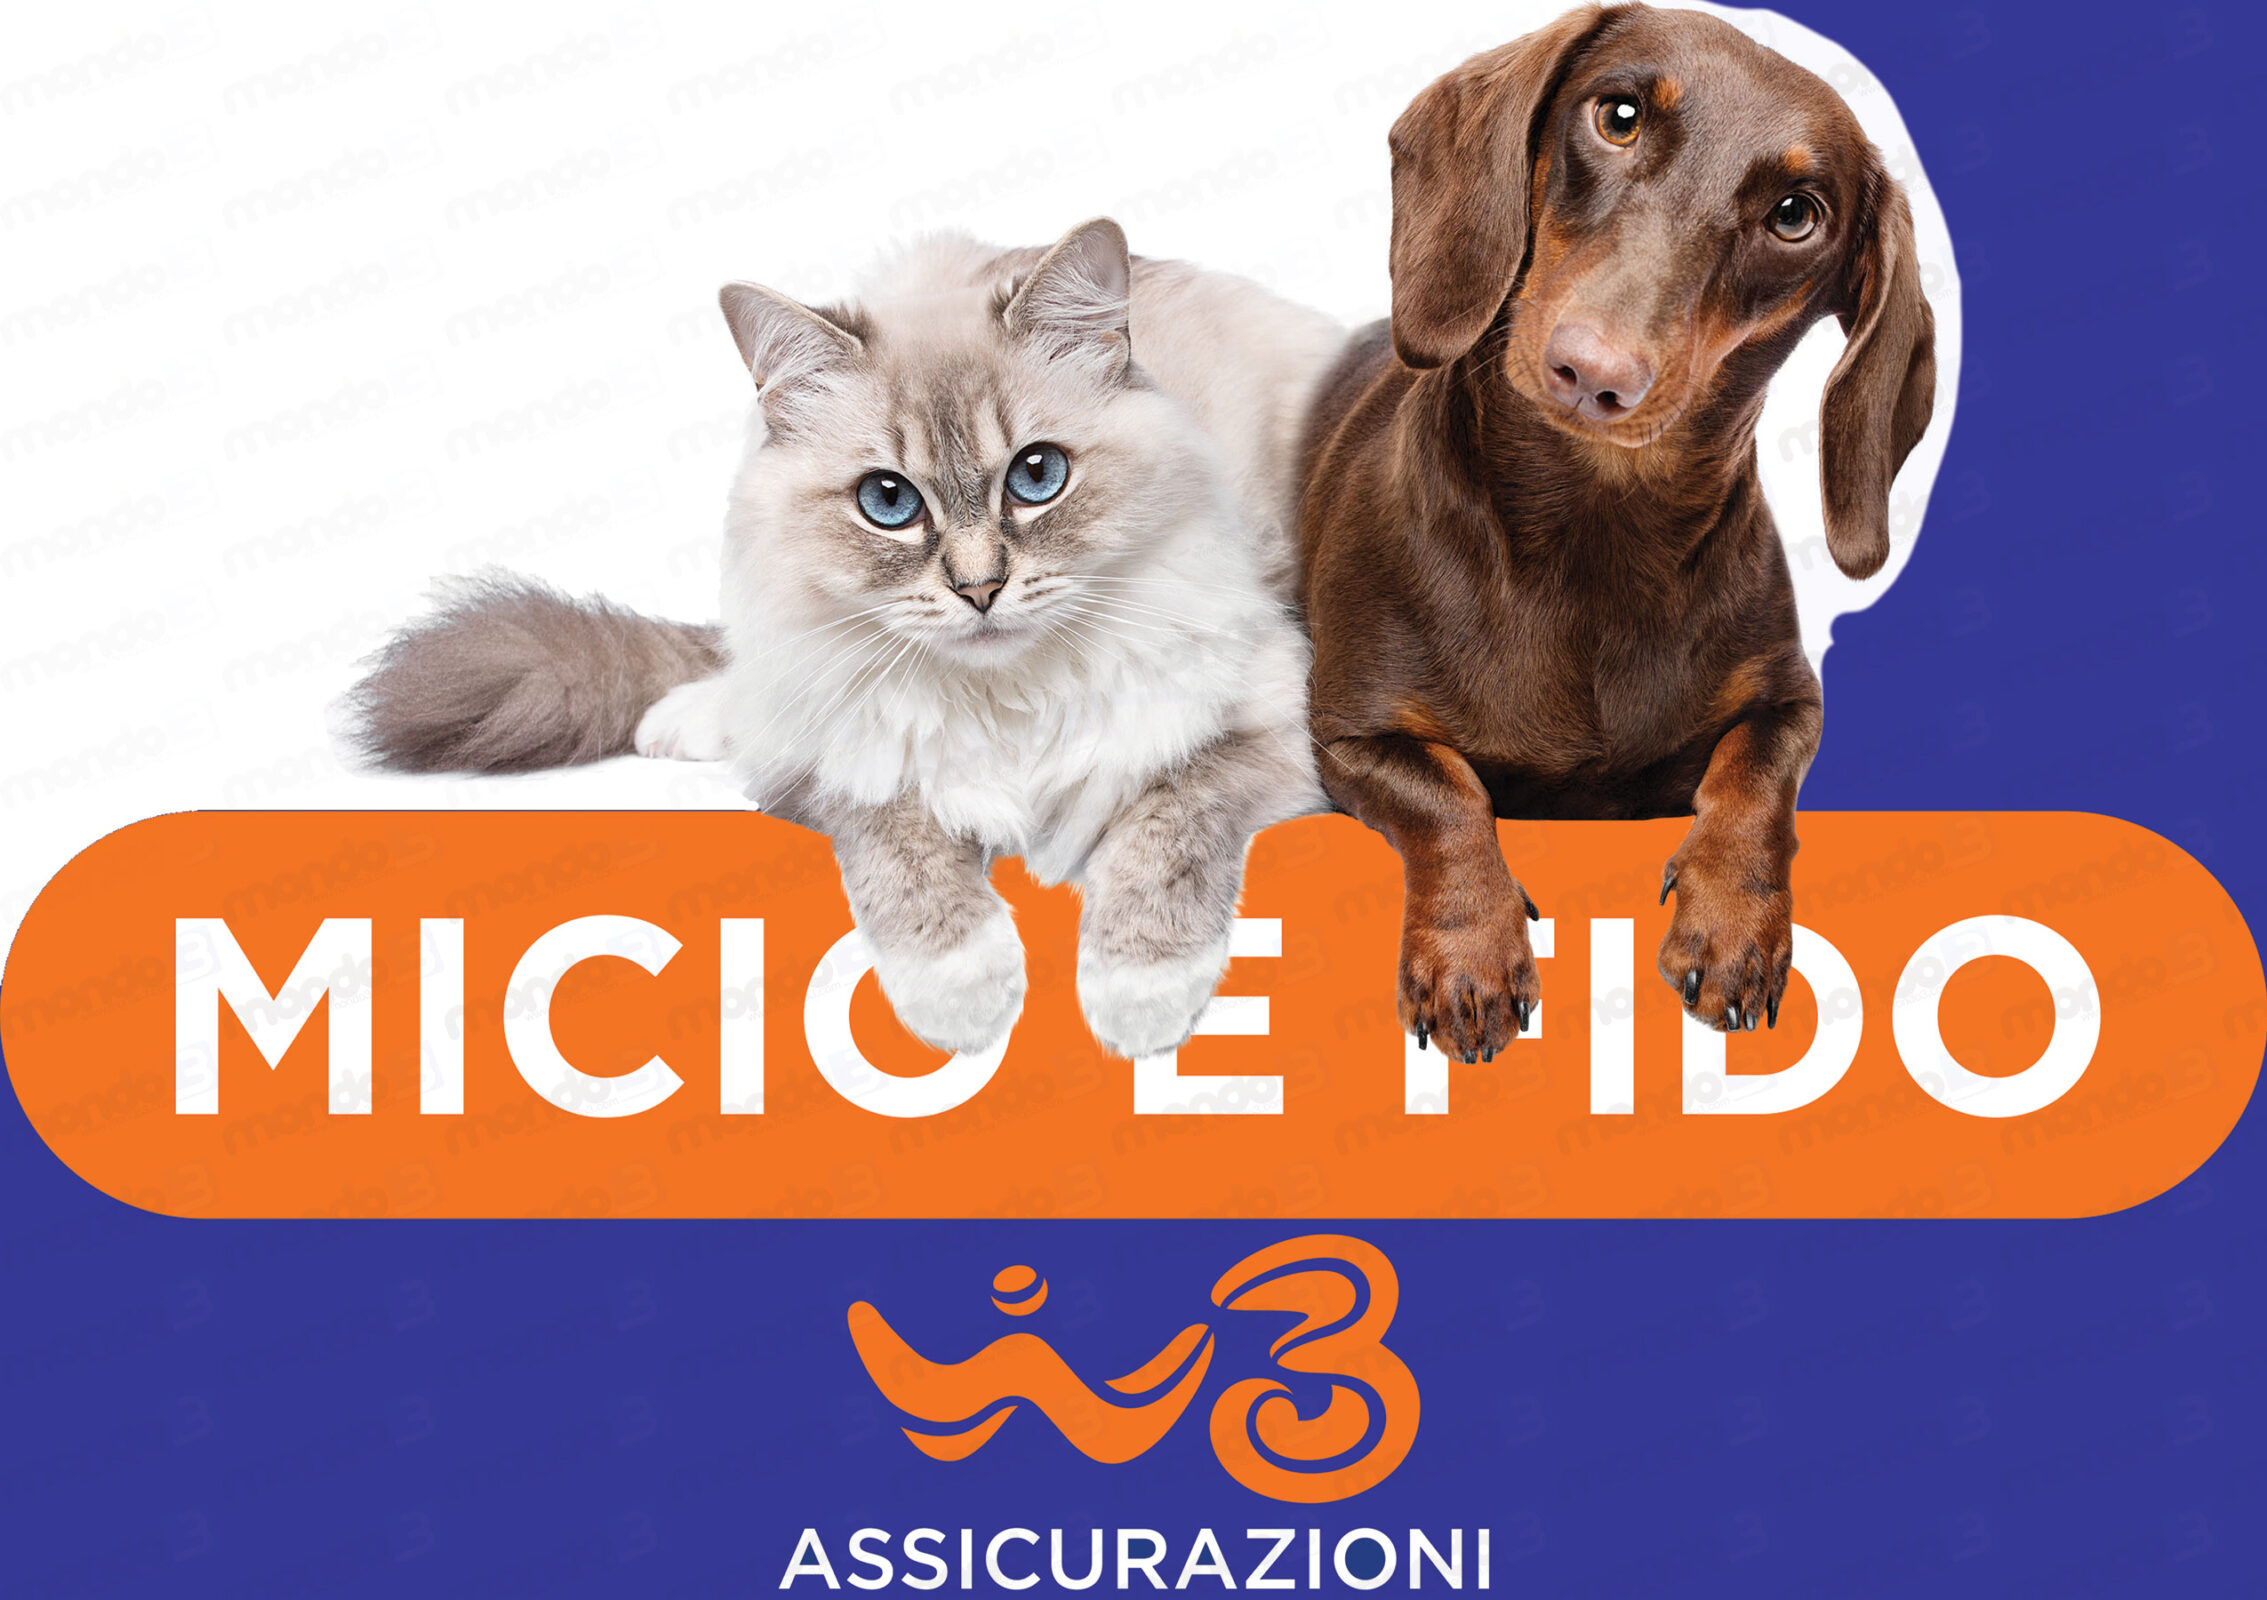 Micio and Fido, the new Windtre Insurance policy for our furry friends